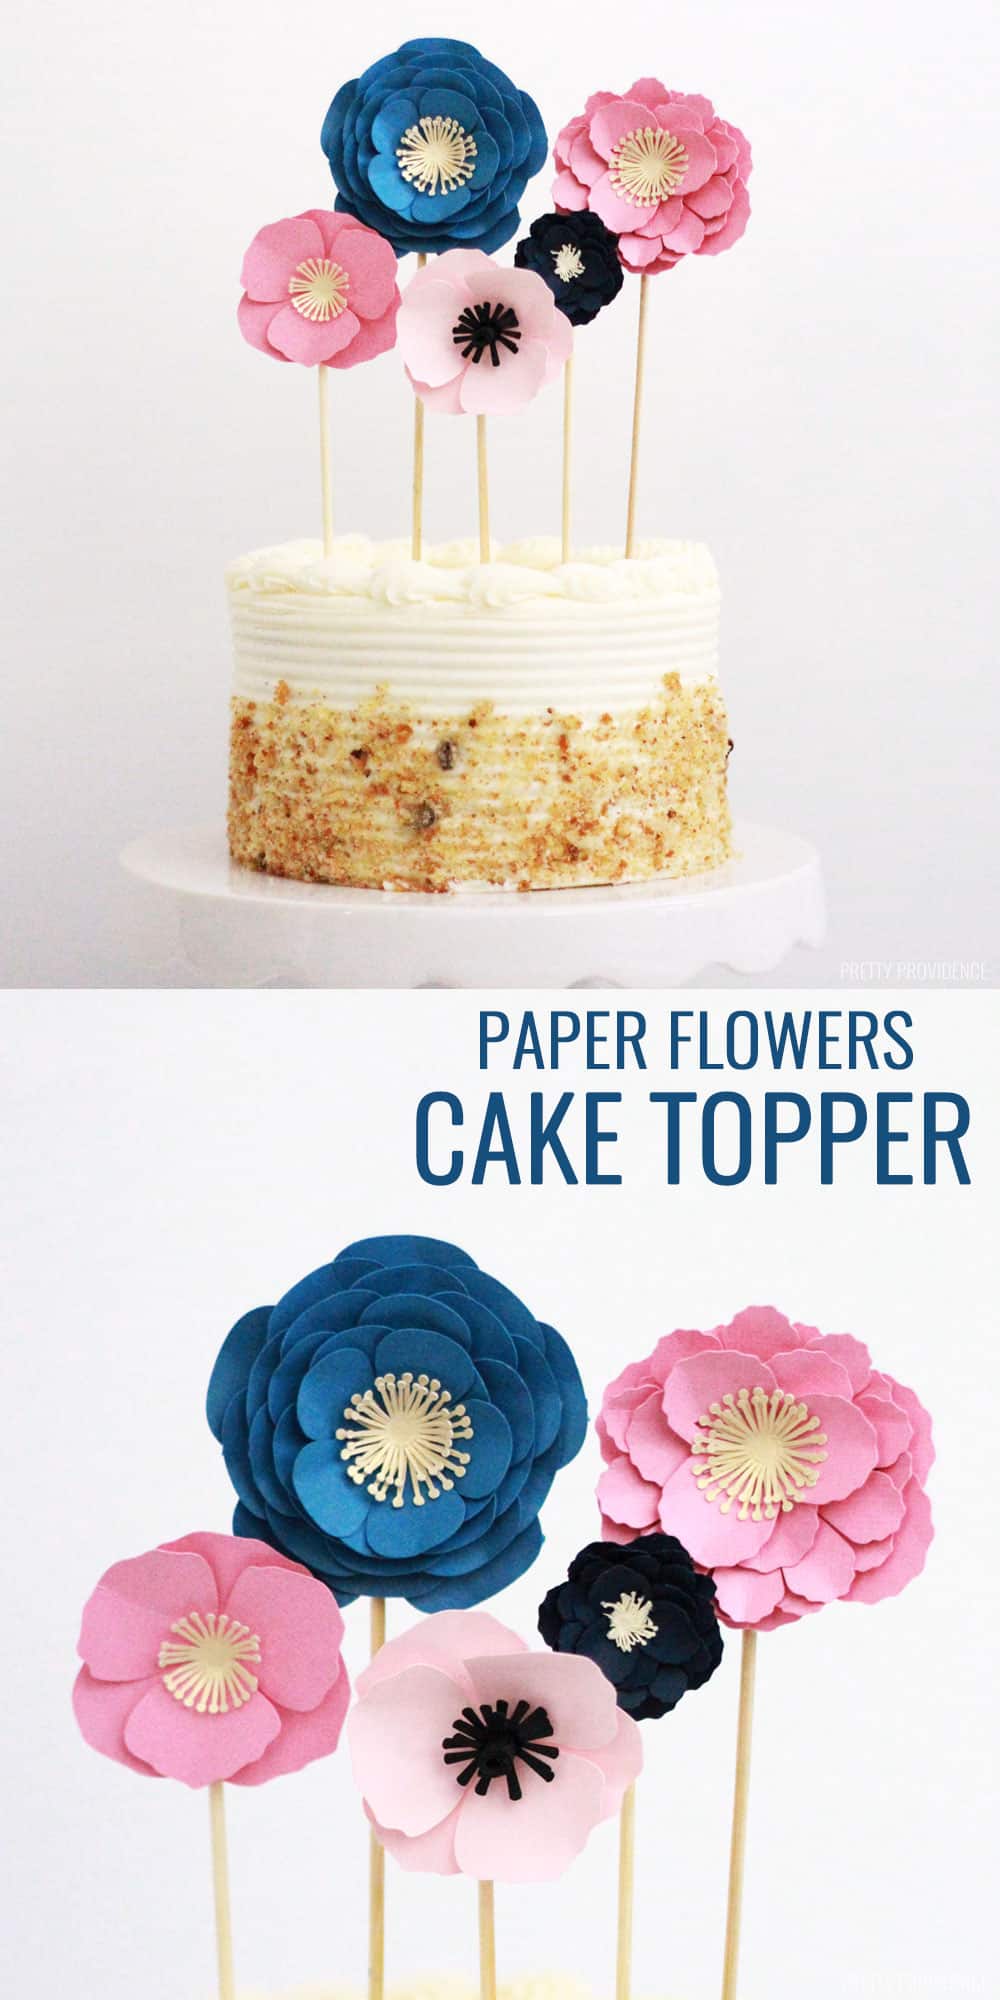 How to make a Paper Flower Cake Topper